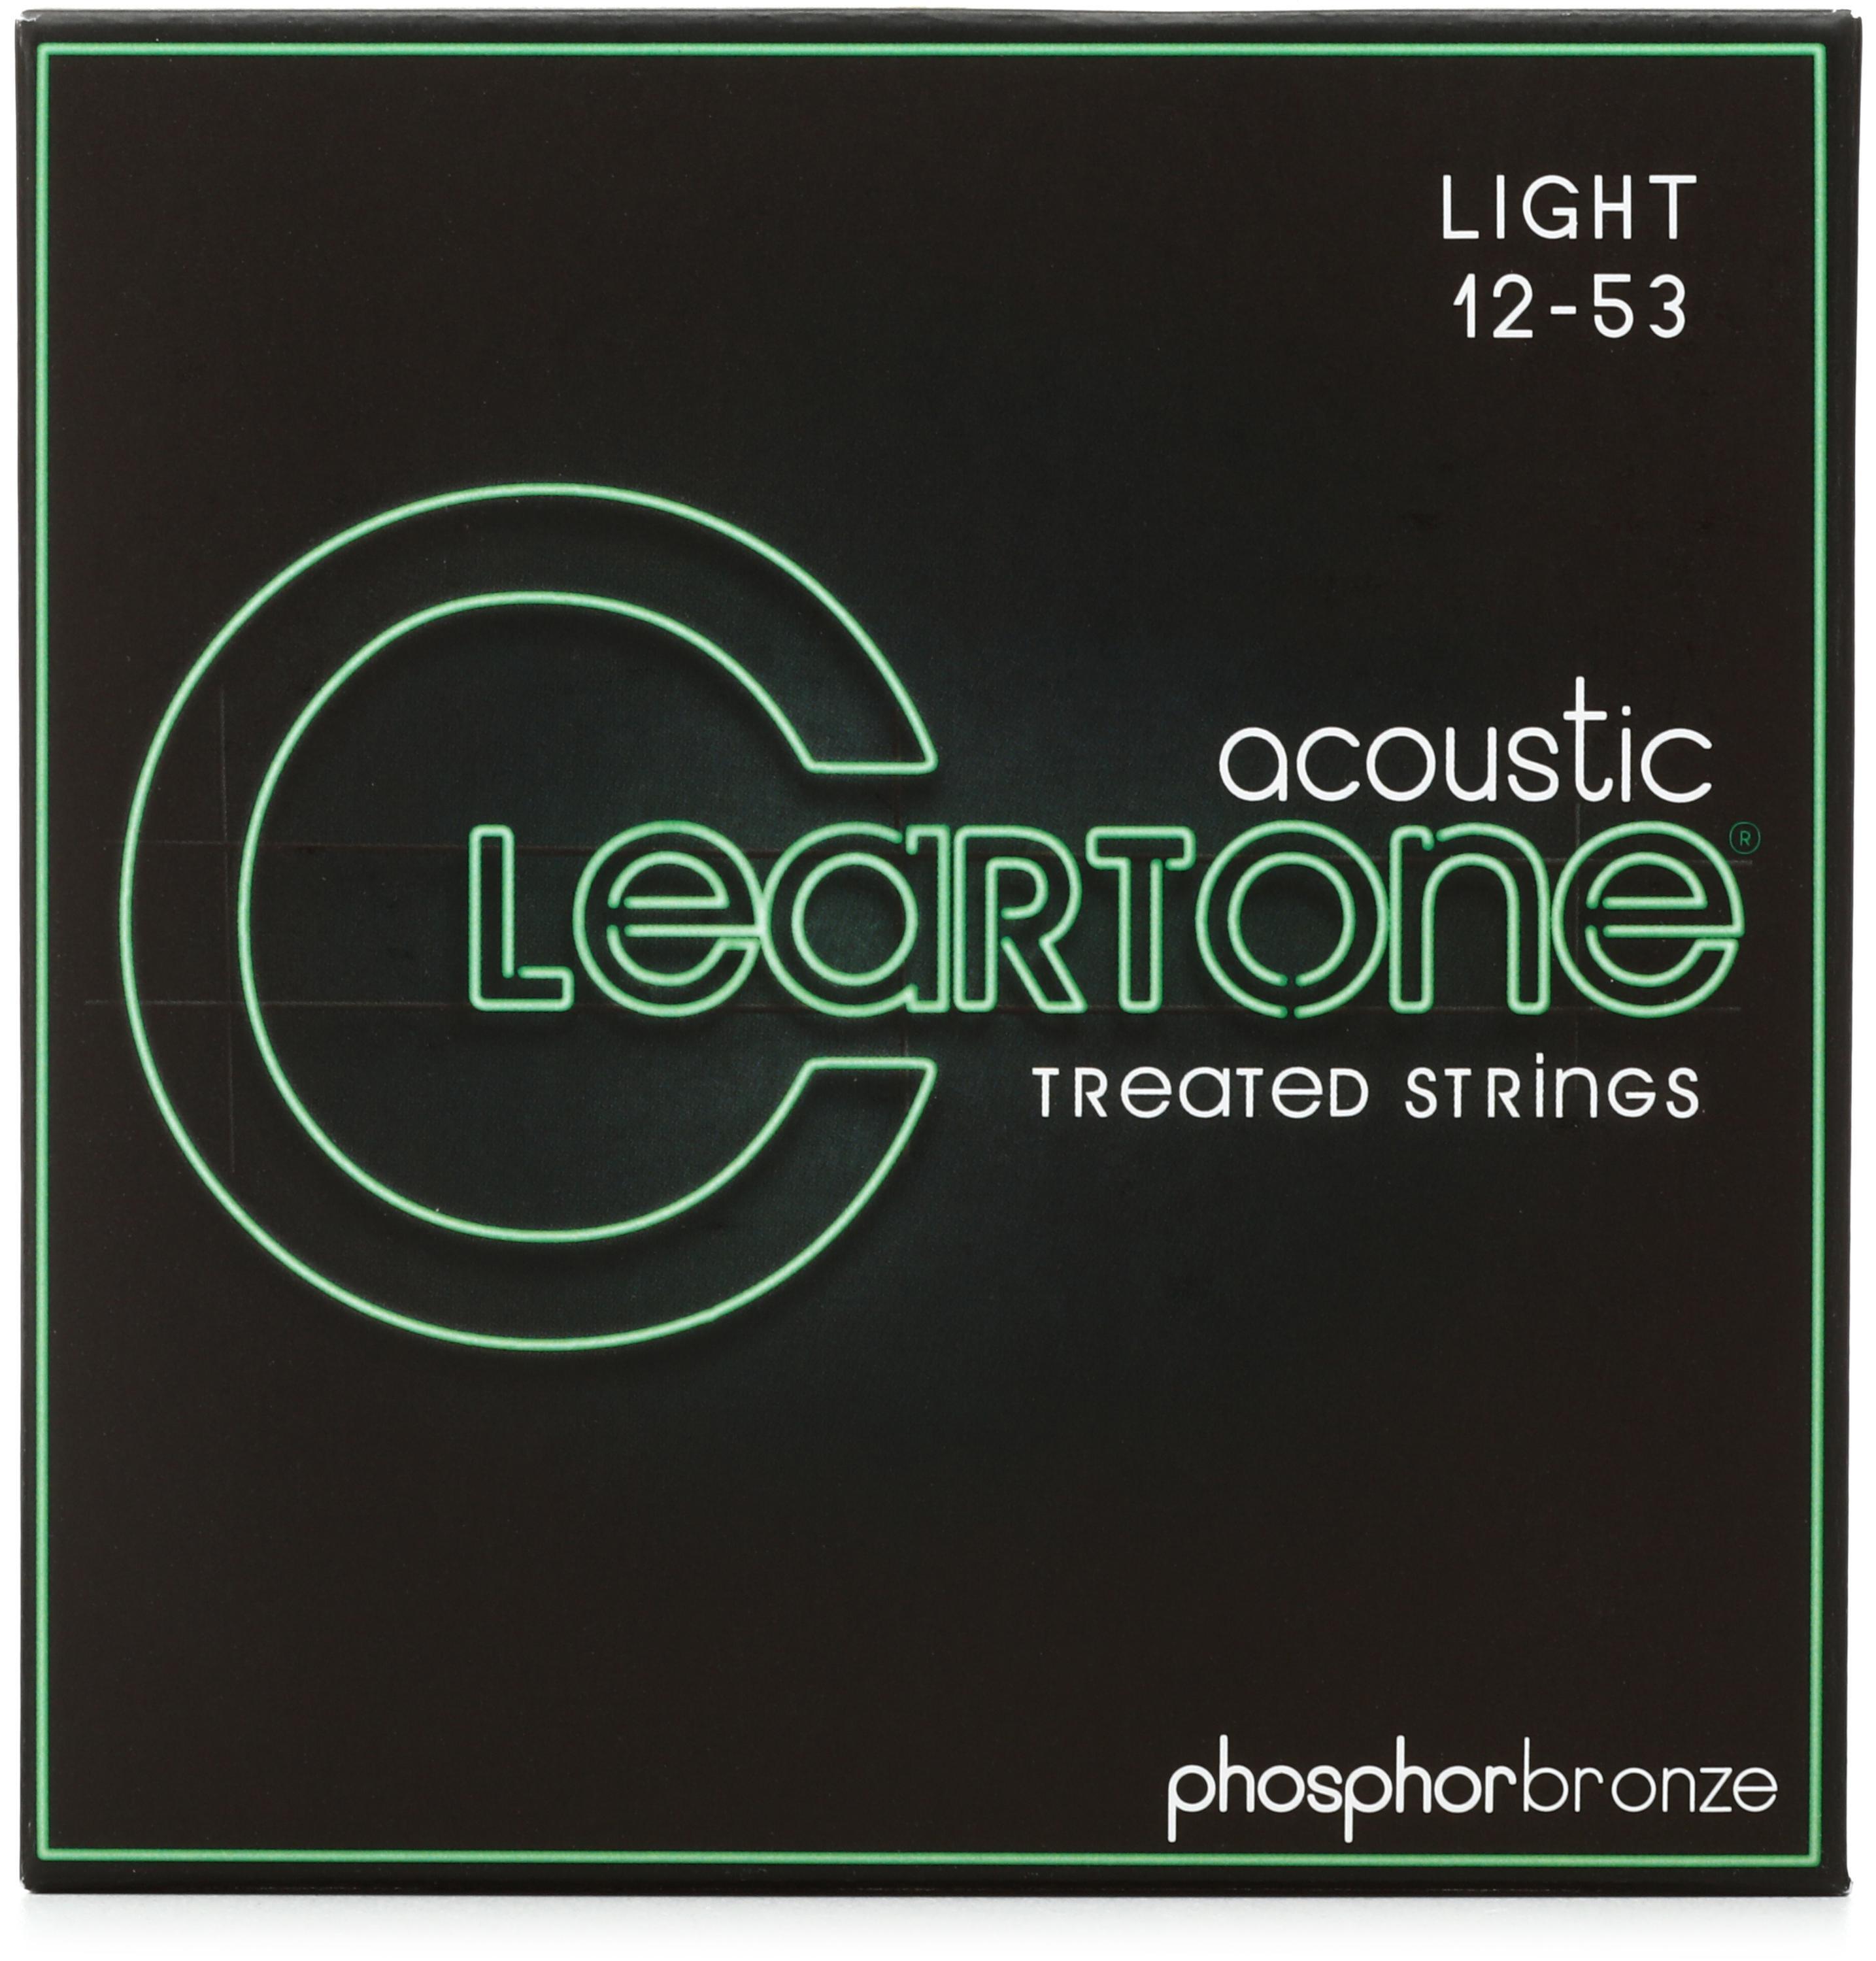 Cleartone 7412 EMP Phosphor Bronze Acoustic Guitar Strings - .012-.053 Light  | Sweetwater